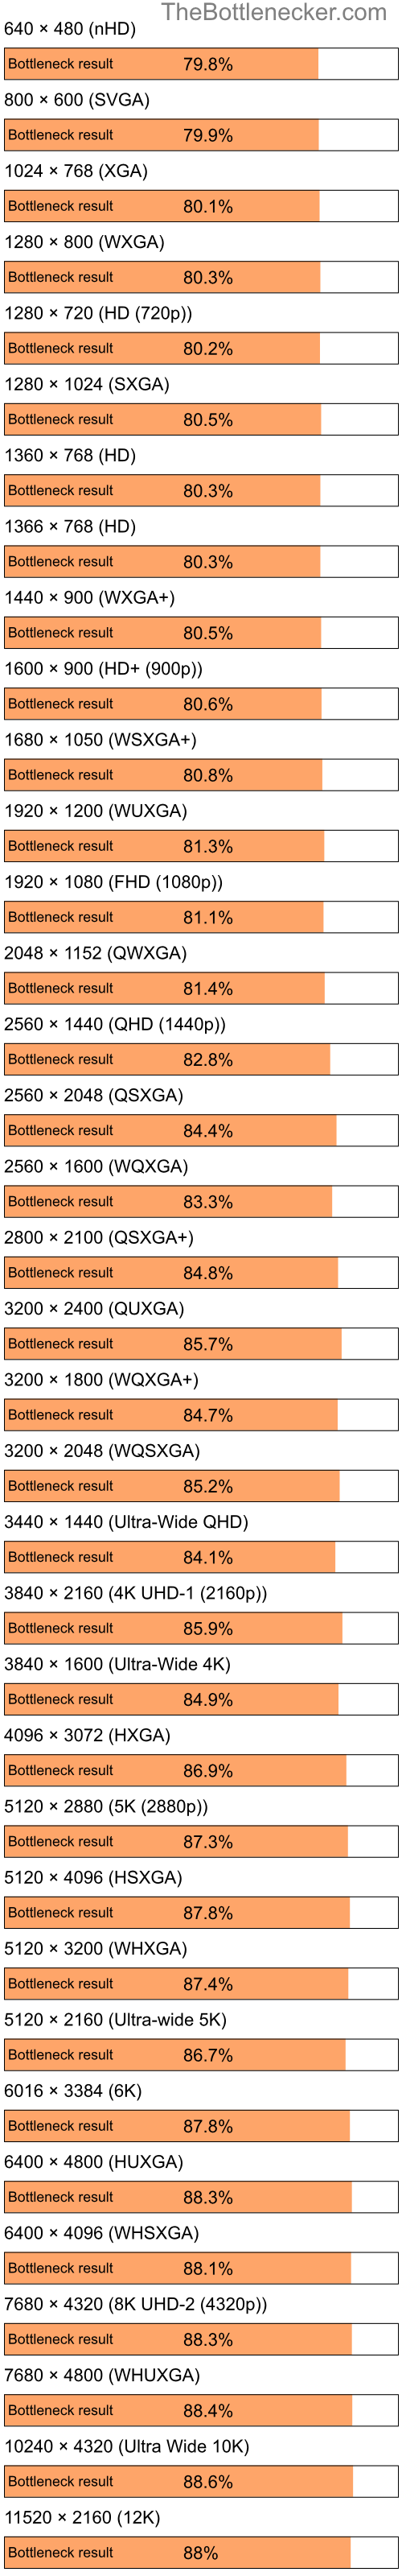 Bottleneck results by resolution for Intel Atom Z520 and AMD Mobility Radeon X1300 in Graphic Card Intense Tasks